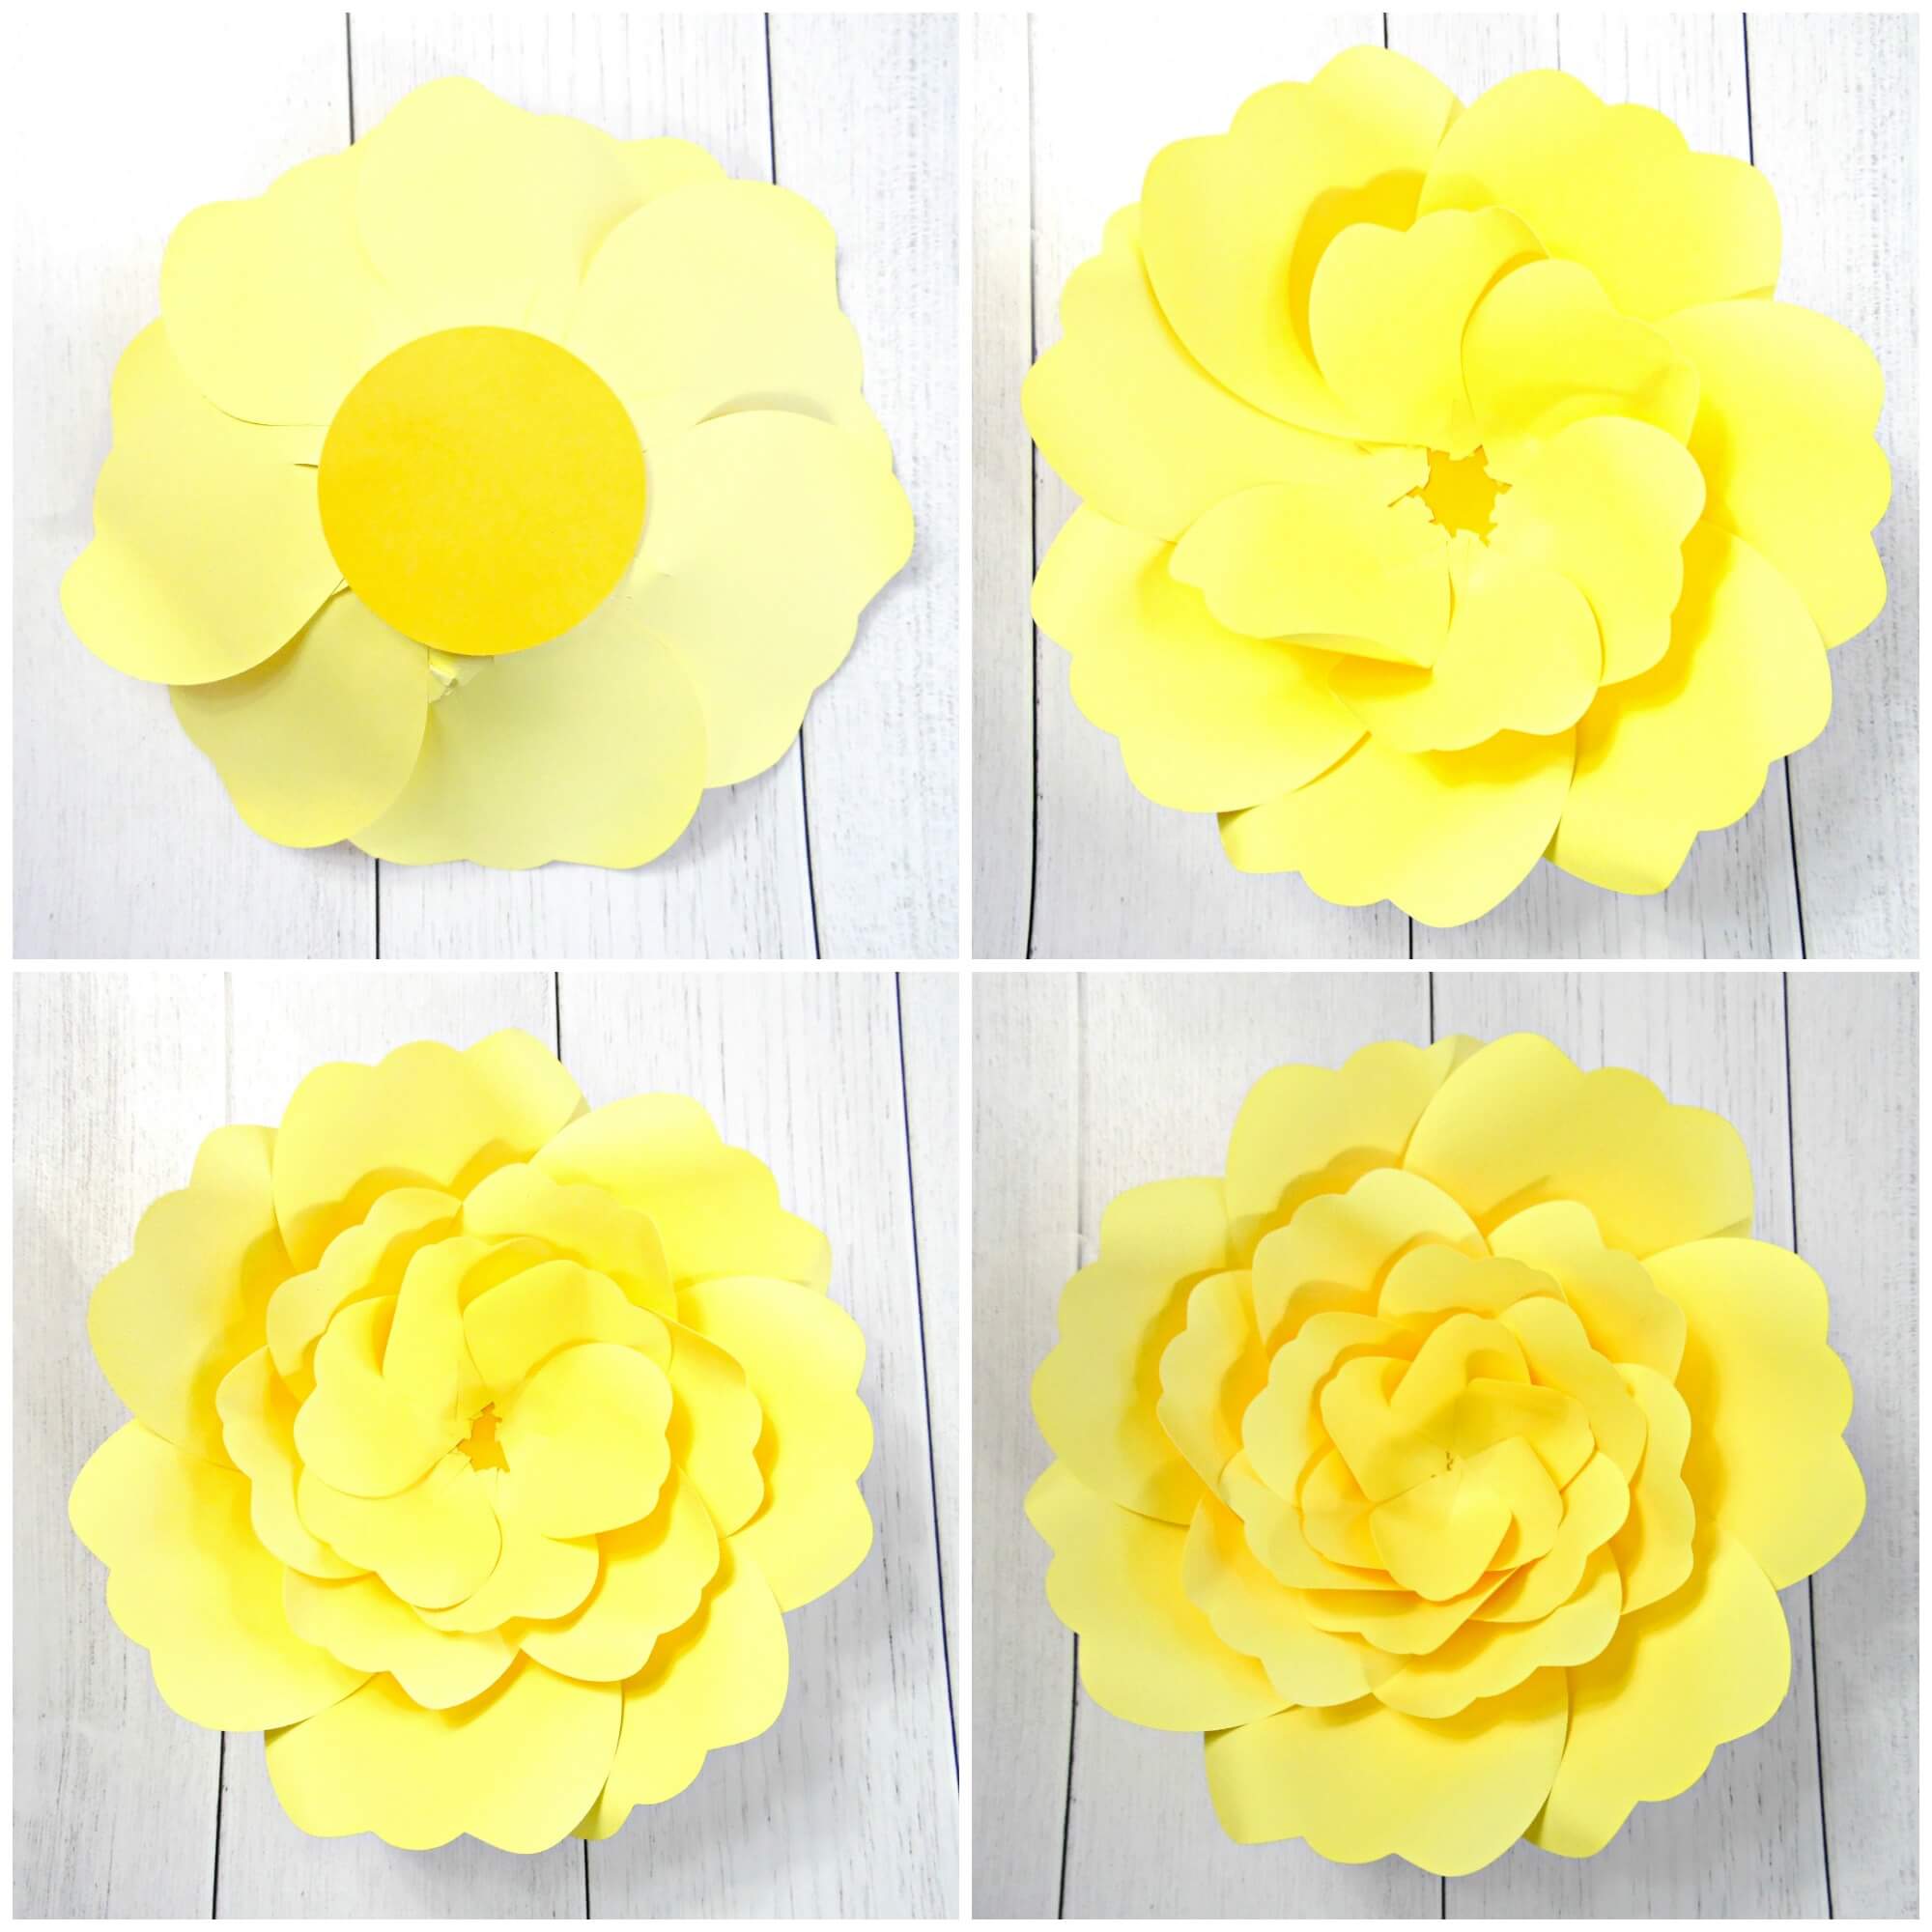 Four collaged images showing the process of making a giant yellow Charlotte rose paper flower. The top left image shows the base of the flower, and the other three images show the flower after adding layers of petals.